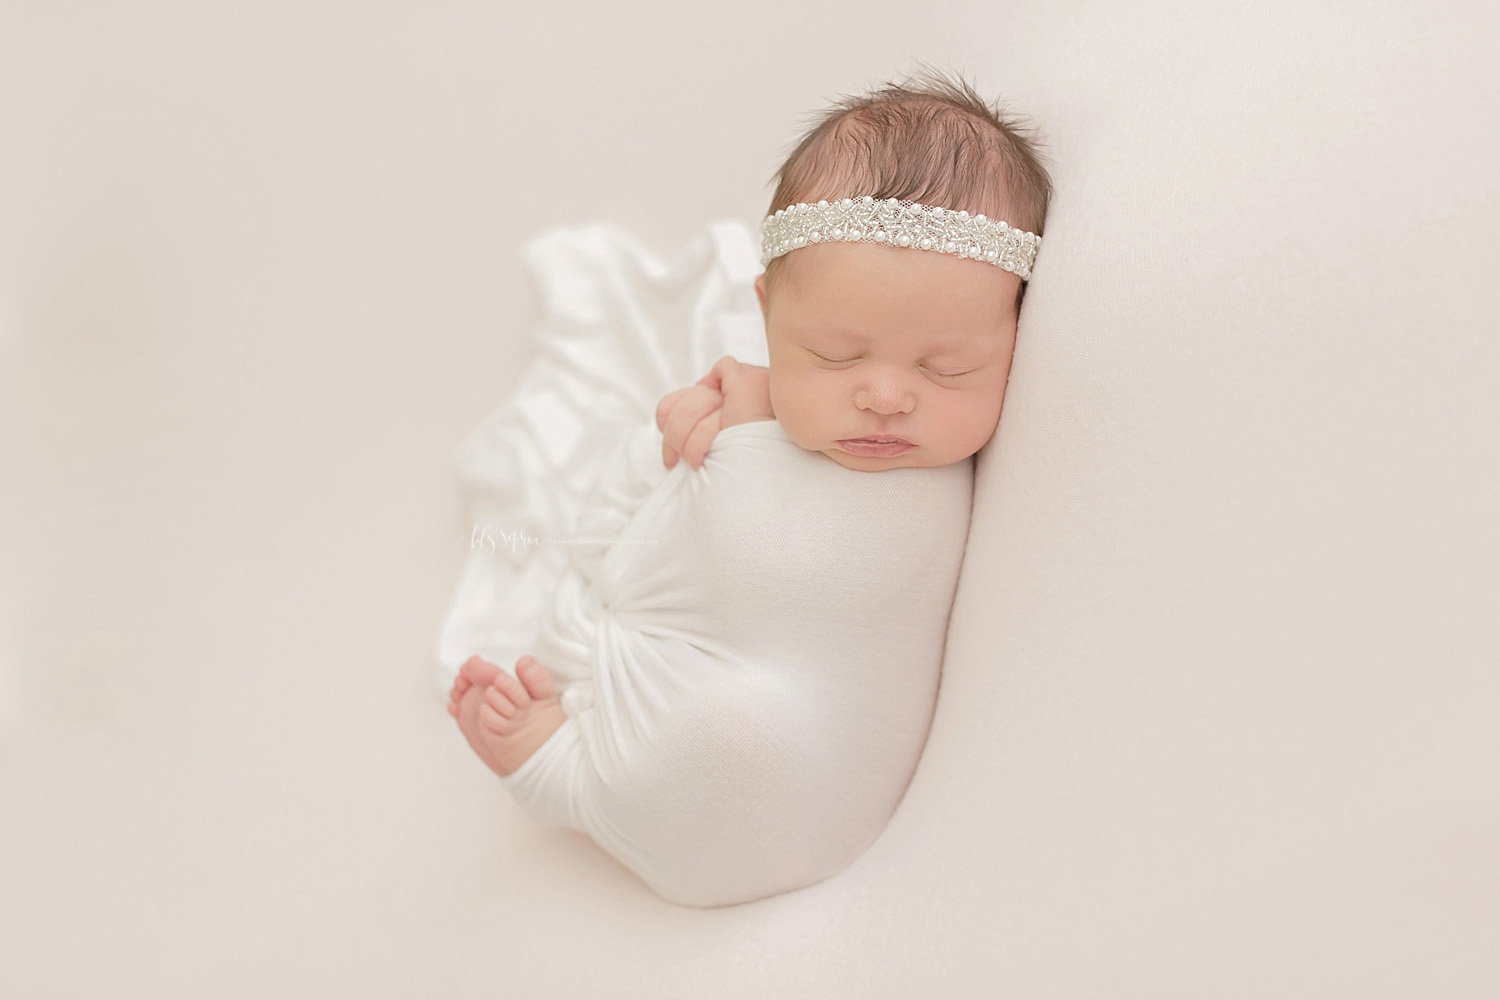  Image of a sleeping, newborn, baby, girl, on her back, wrapped in a white blanket with her toes and hands sticking out and wearing a white lace headband on her head.&nbsp; 